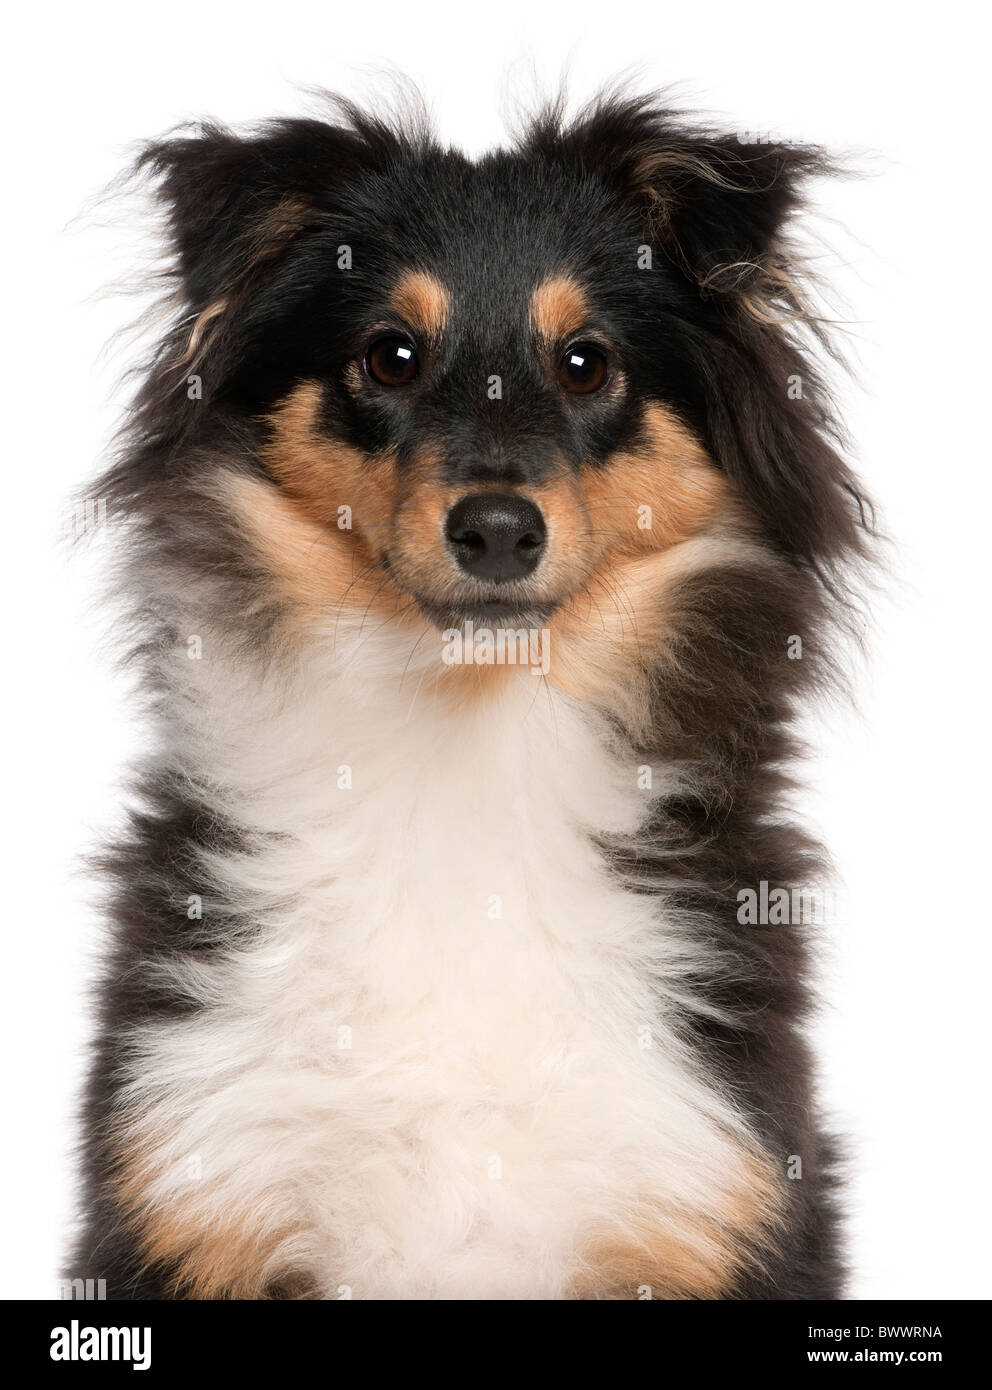 Shetland Sheepdog puppy, 6 months old, in front of white background Stock Photo